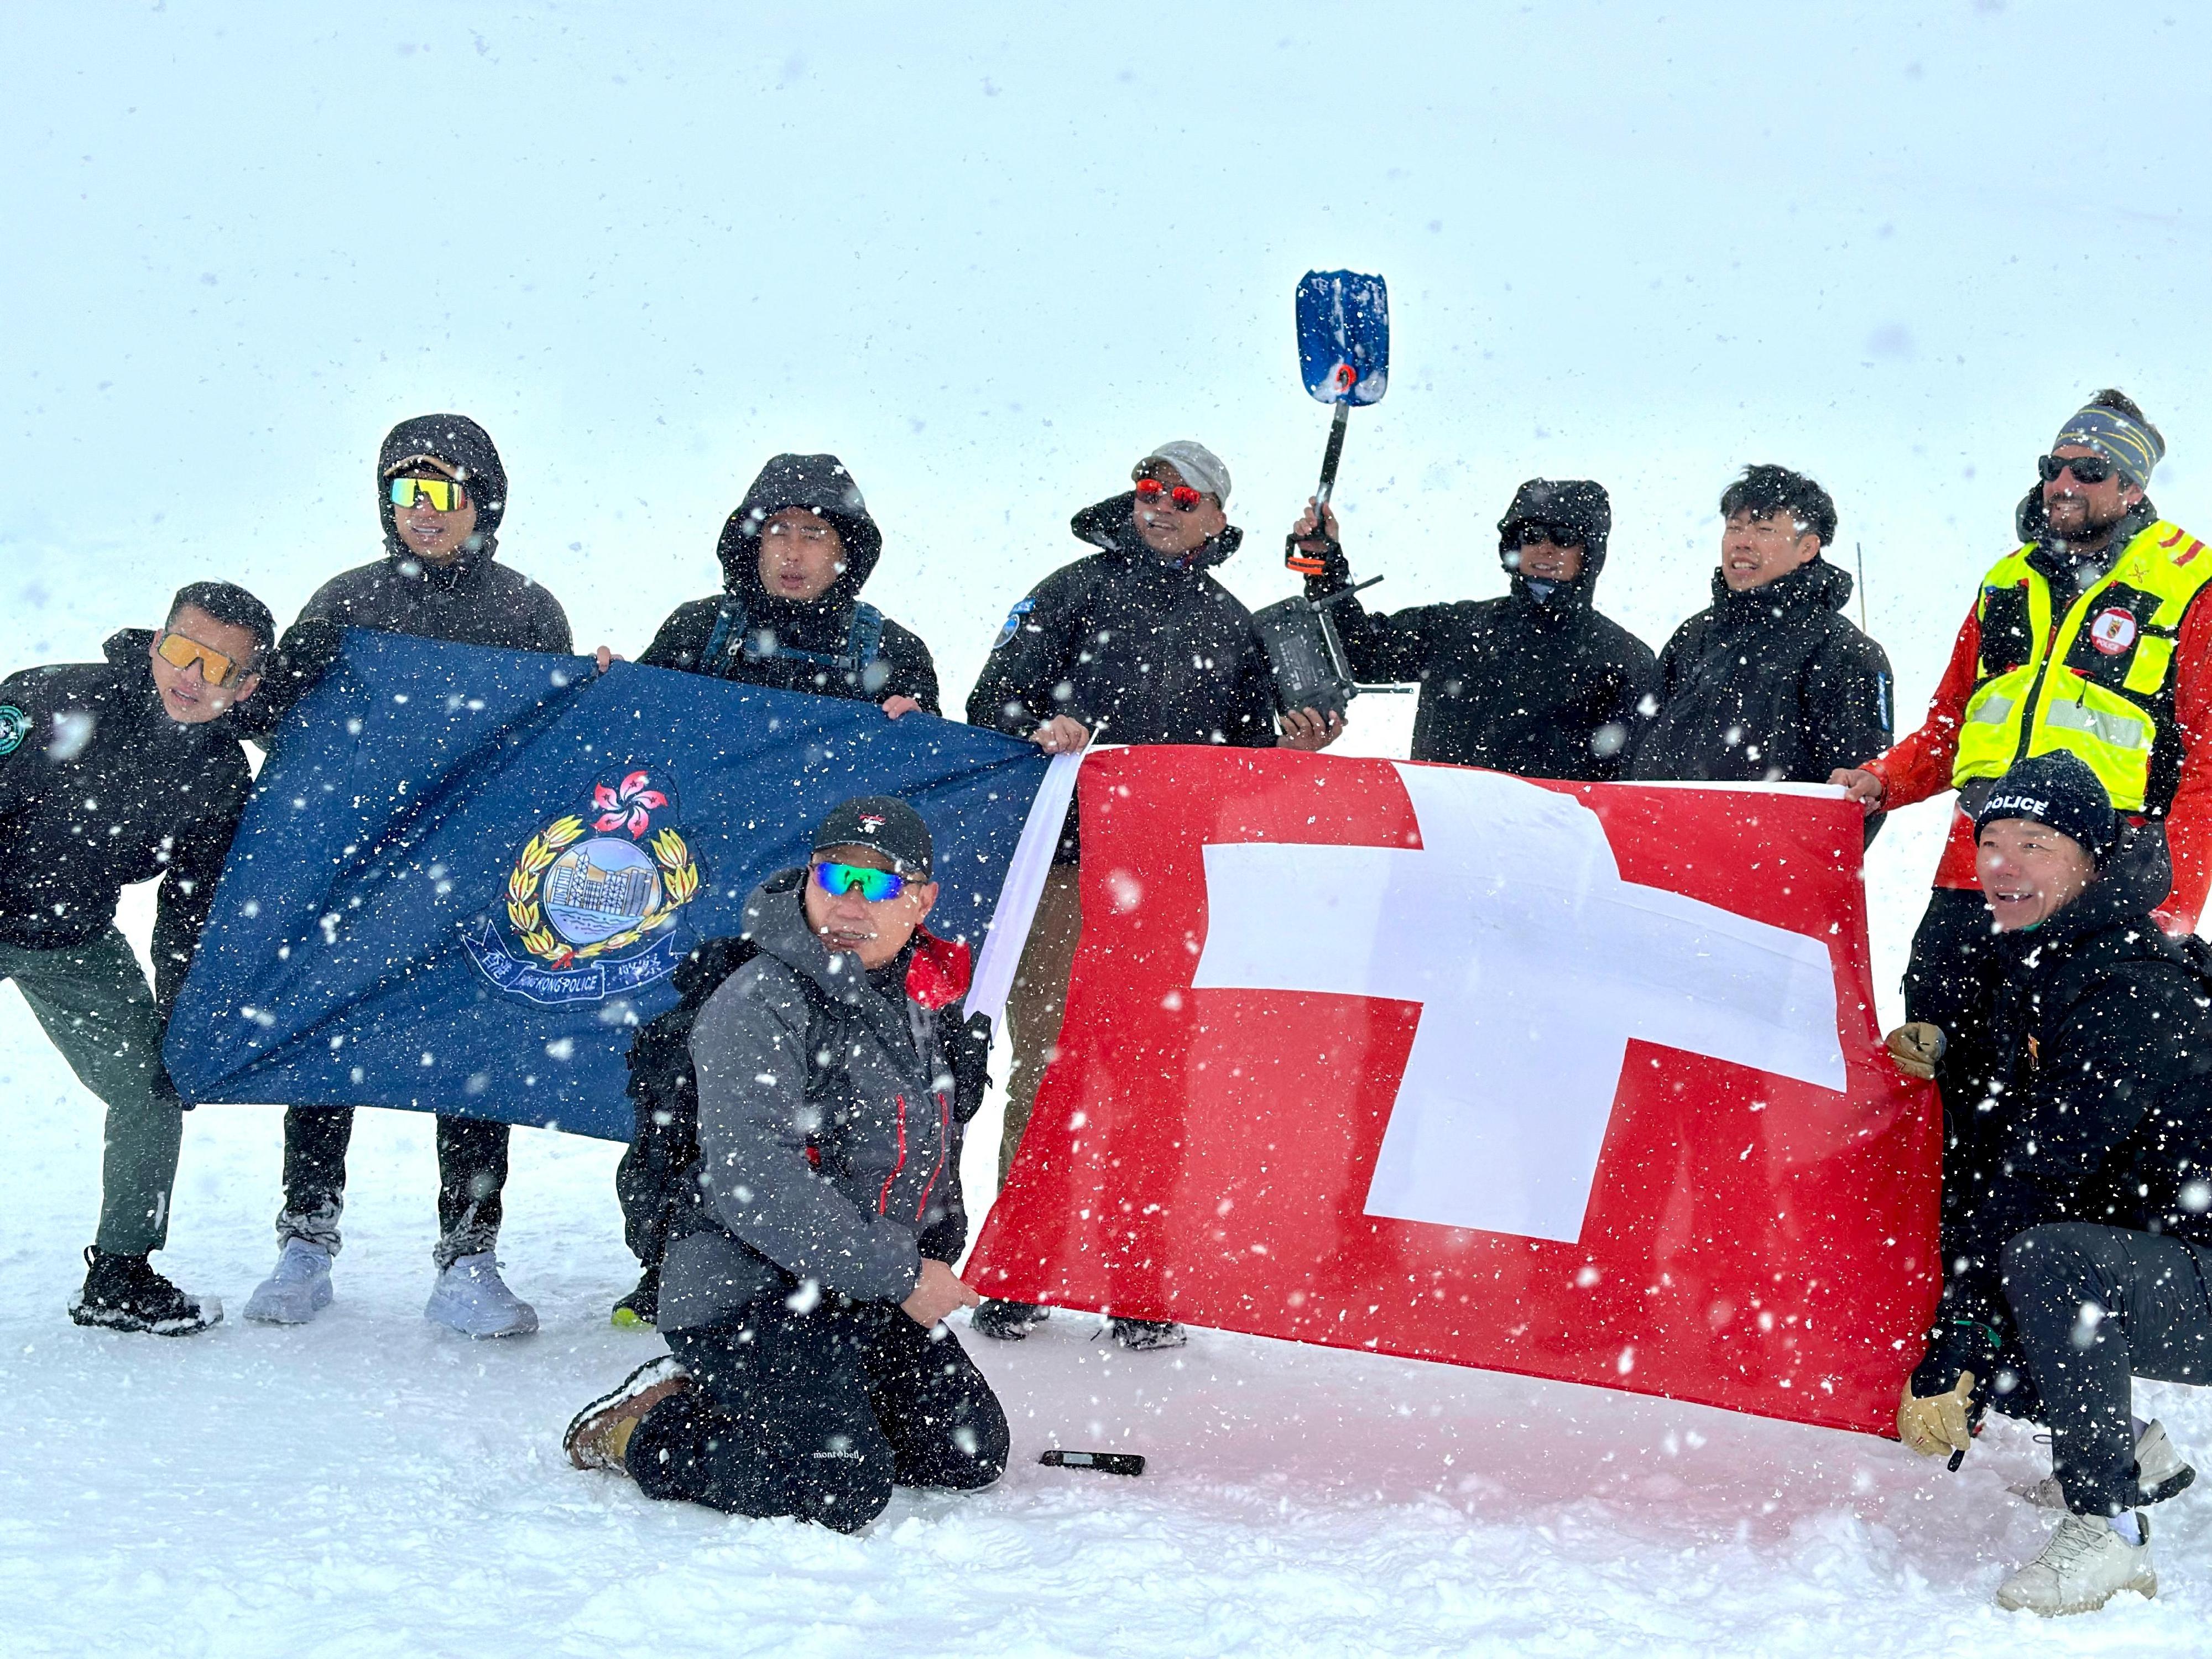 Officers of the Information Systems Wing of the Hong Kong Police Force participated in 49th International Exhibition of Inventions of Geneva, which was held between April 17 and 21 in Geneva, Switzerland. Photo shows Swiss Police and Hong Kong Police conducting testing of HKSOS Mobile Application on snowy mountains. 